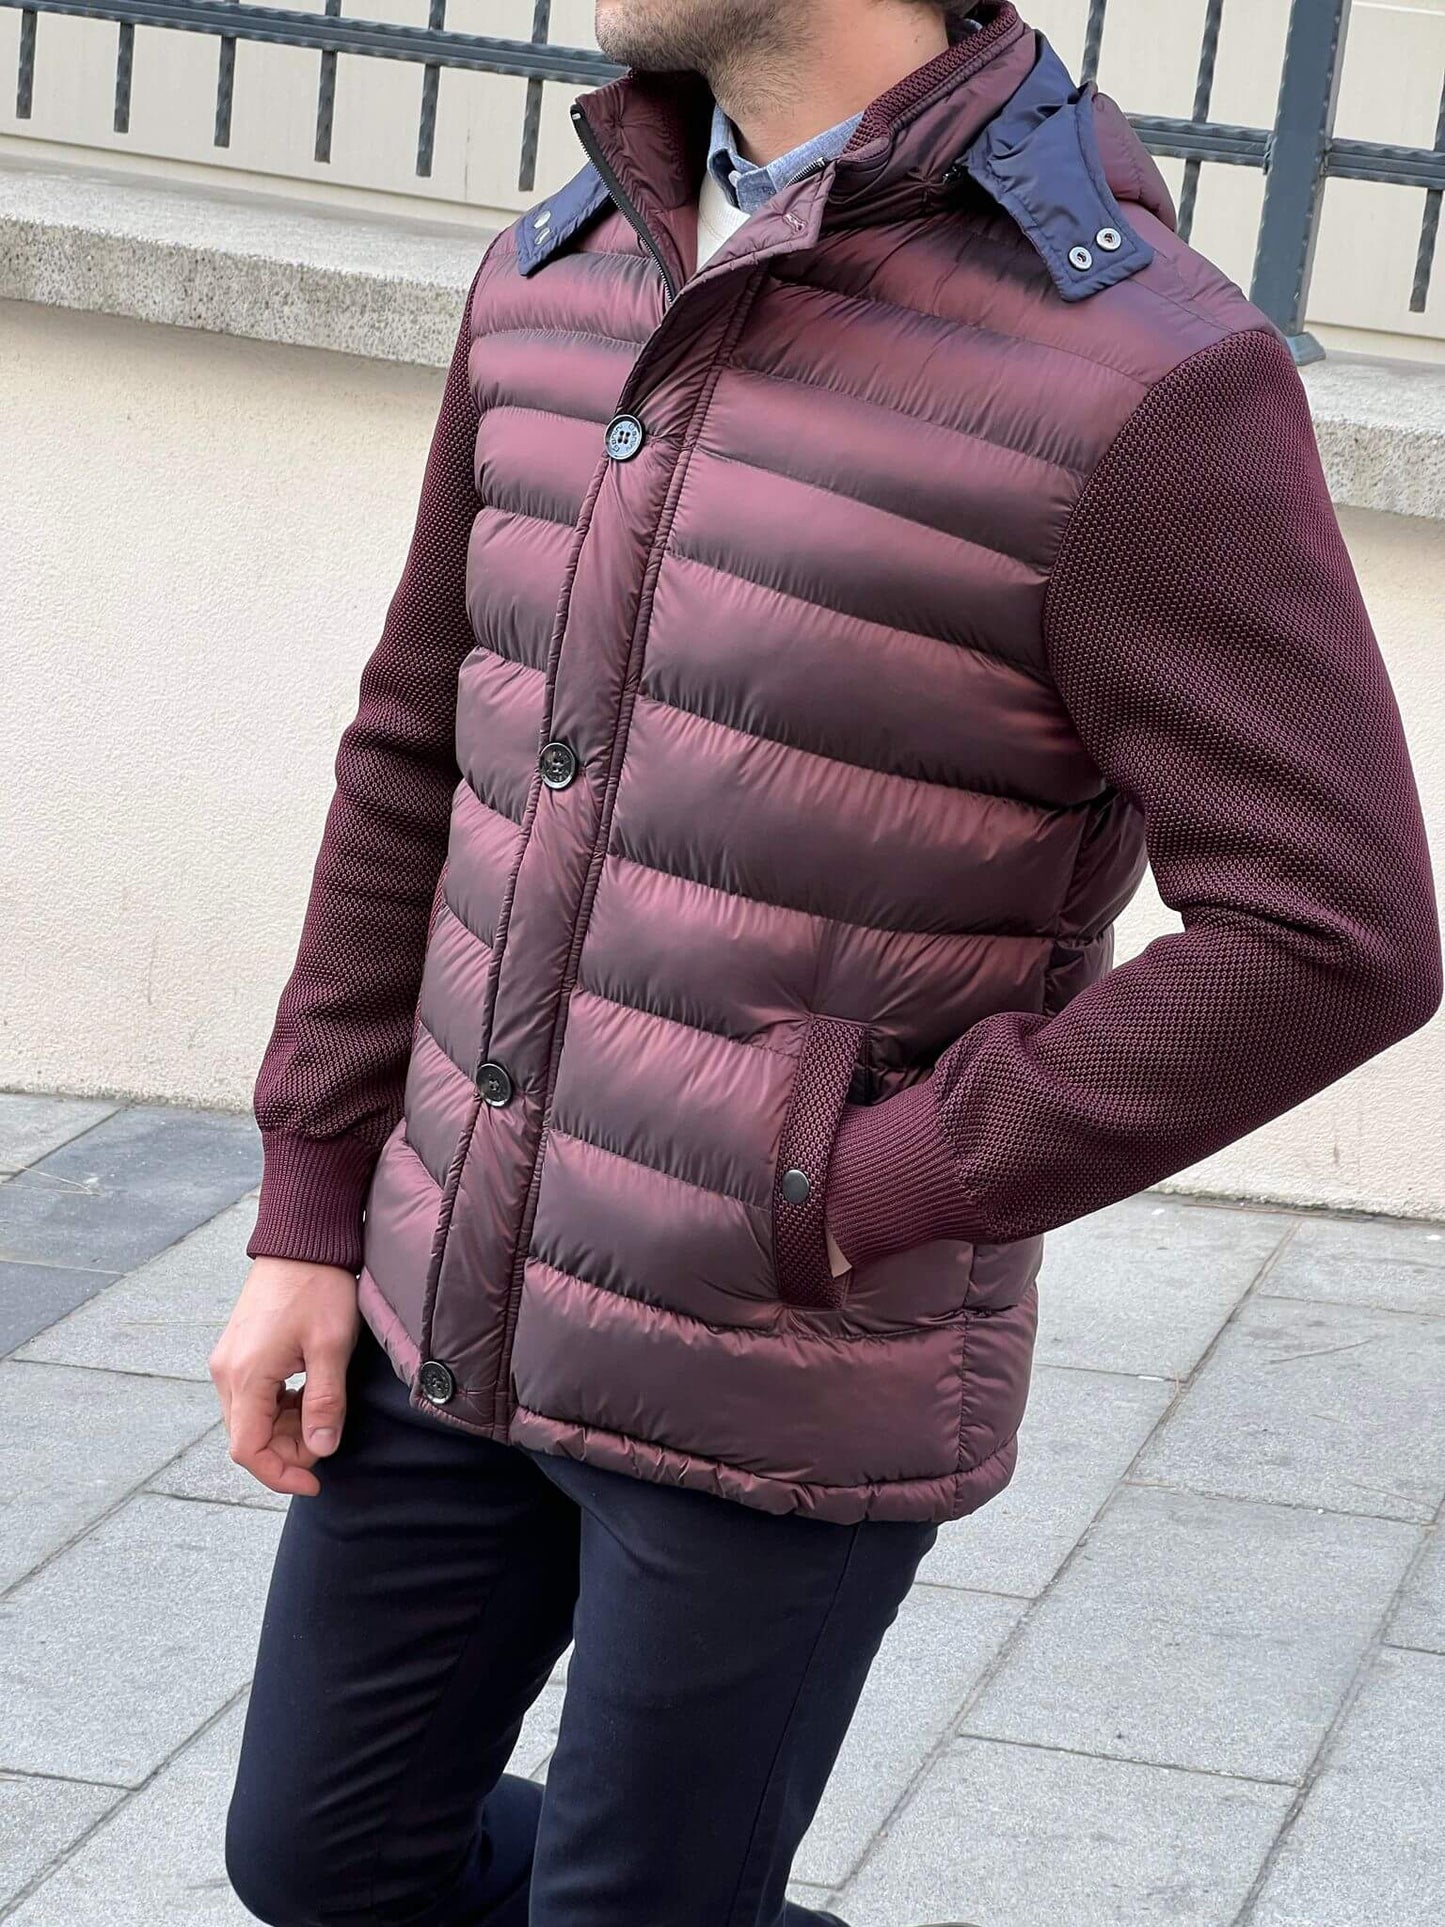 Chic and cozy: Our male model flaunts a knitted burgundy coat, a perfect blend of comfort and style.